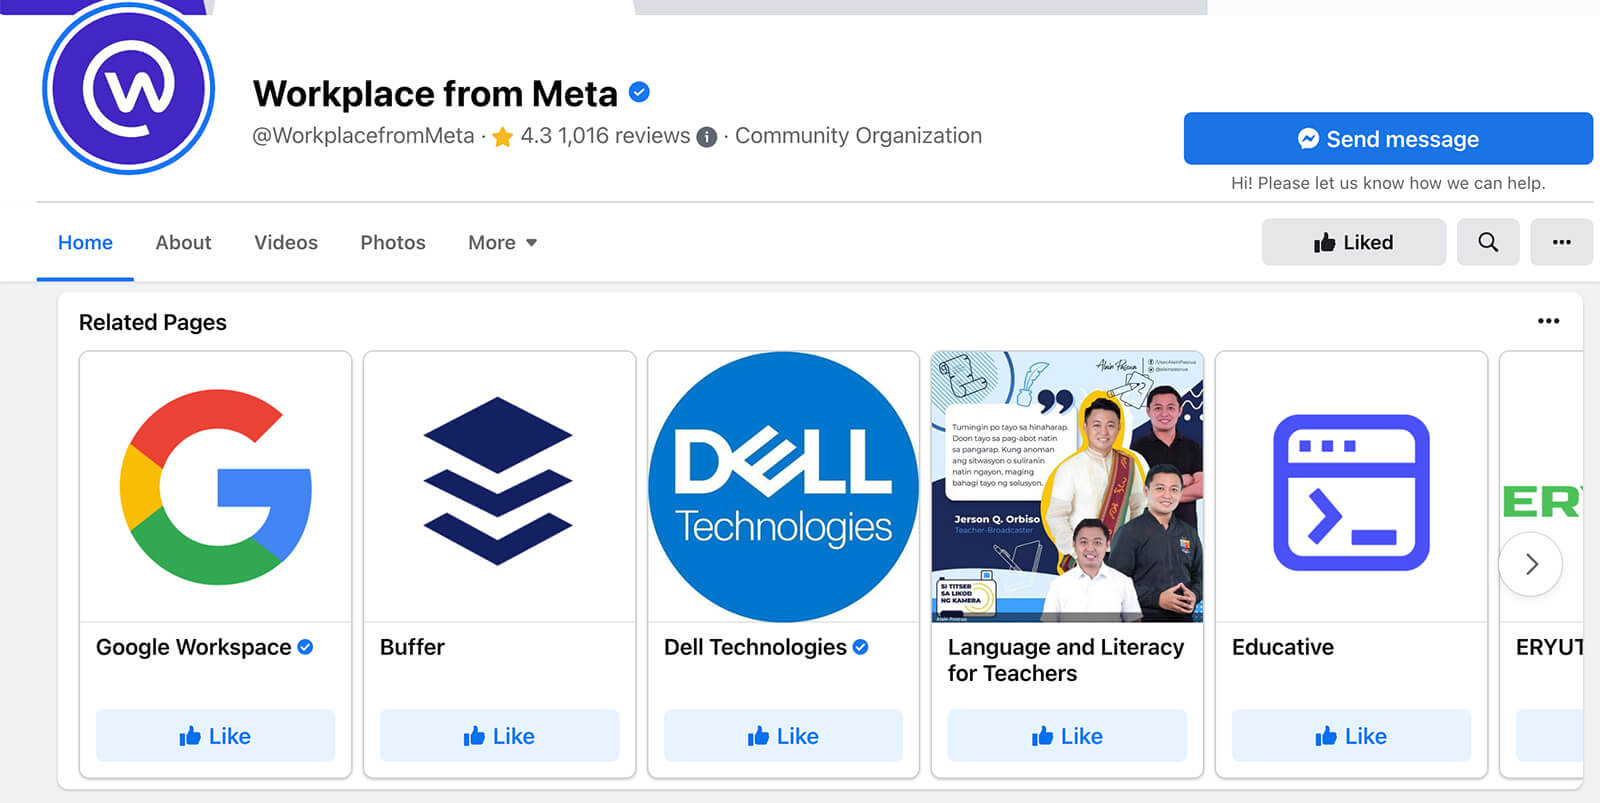 how-to-analyze-competitors-facebook-pages-workplace-from-meta-related-pages-example-4